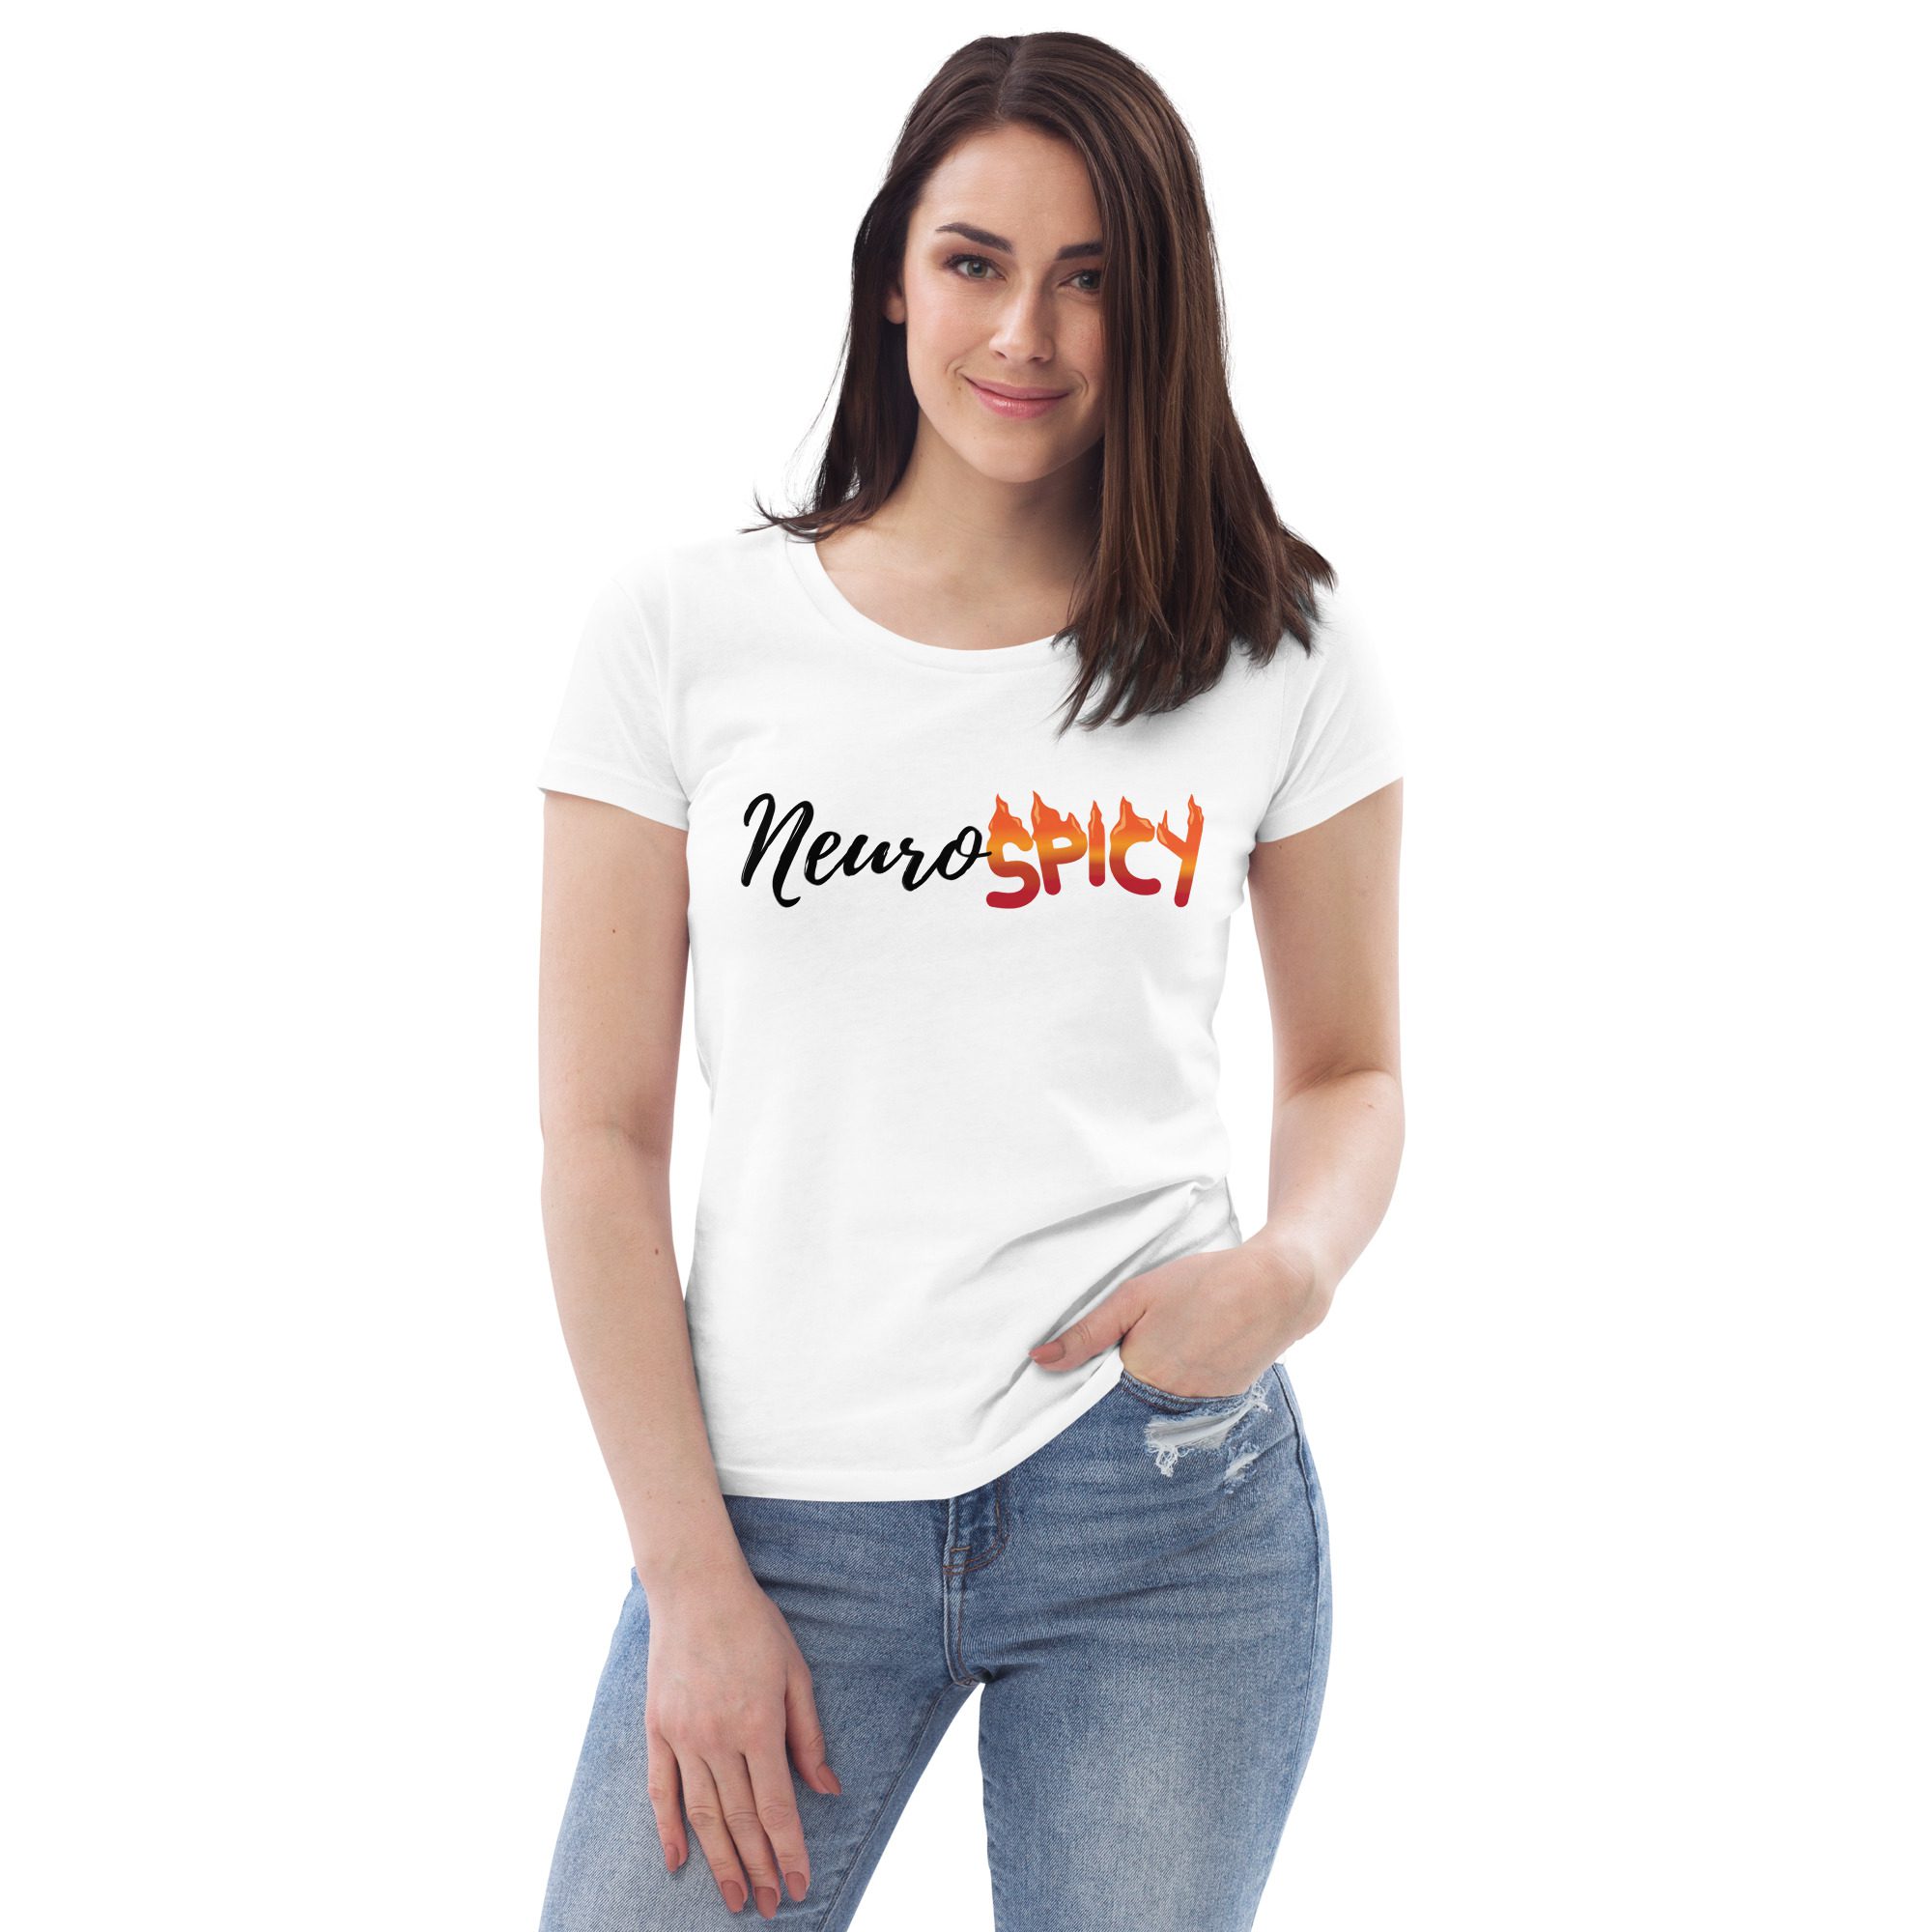 Neurospicy Autism ADHD Awareness Women's Fitted Eco T-shirt